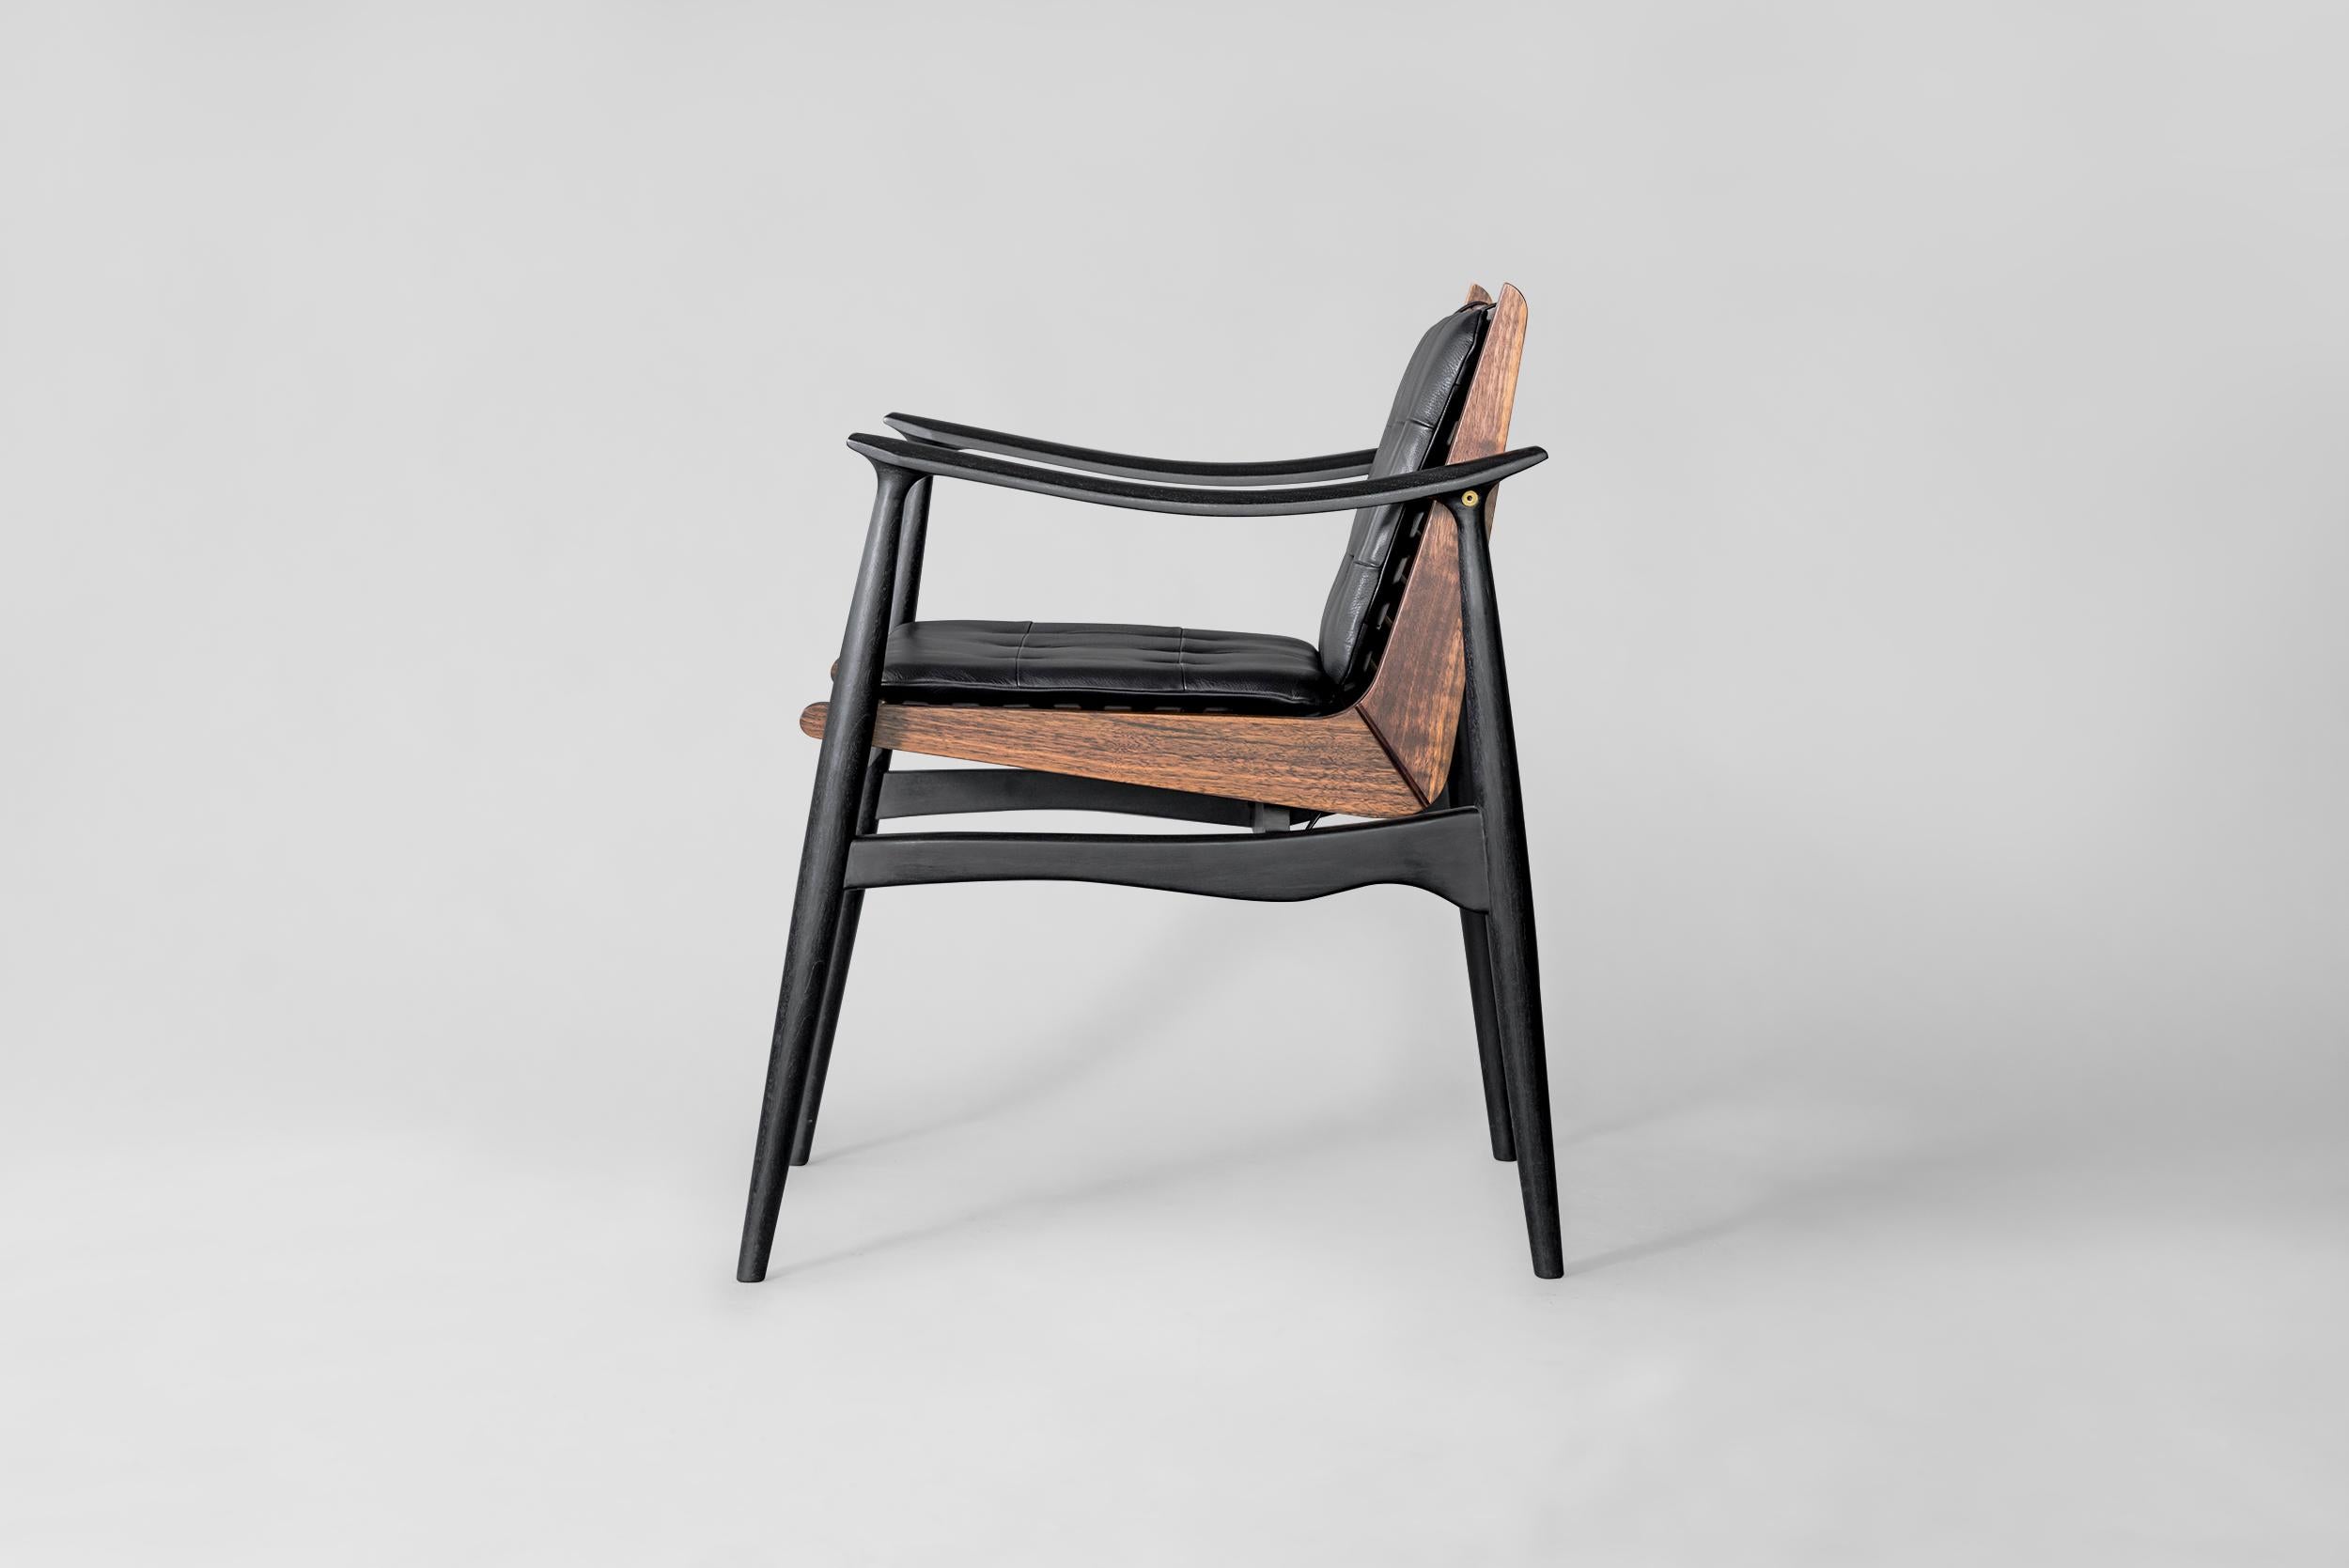 The younger brother of the popular ATRA chair. 
* Handcrafted with traditional joinery techniques. 
* Frame made of solid wood in walnut, mahogany, beech, or maple 
* Finishes available in natural oil, dark oil, black char, or black semi gloss
* The